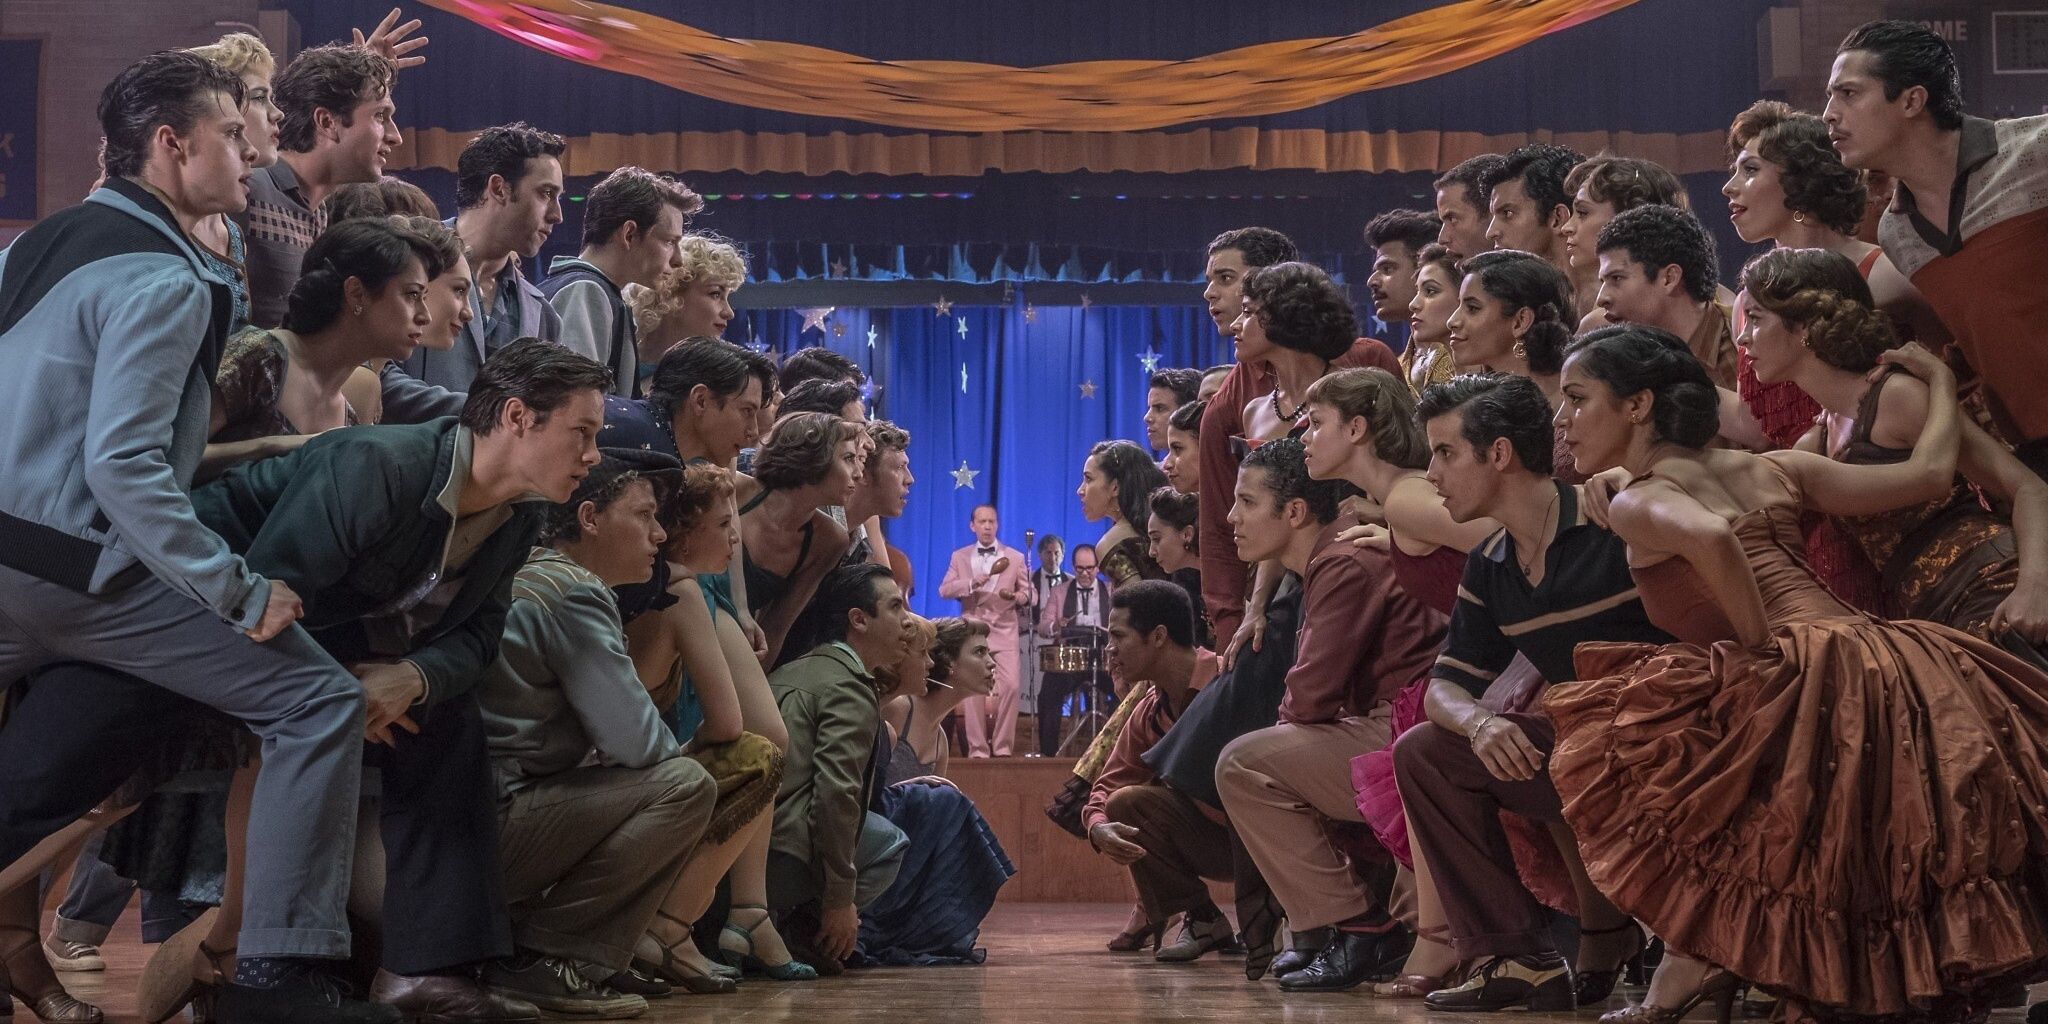 The characters glare at each other on the dance floor in West Side Story